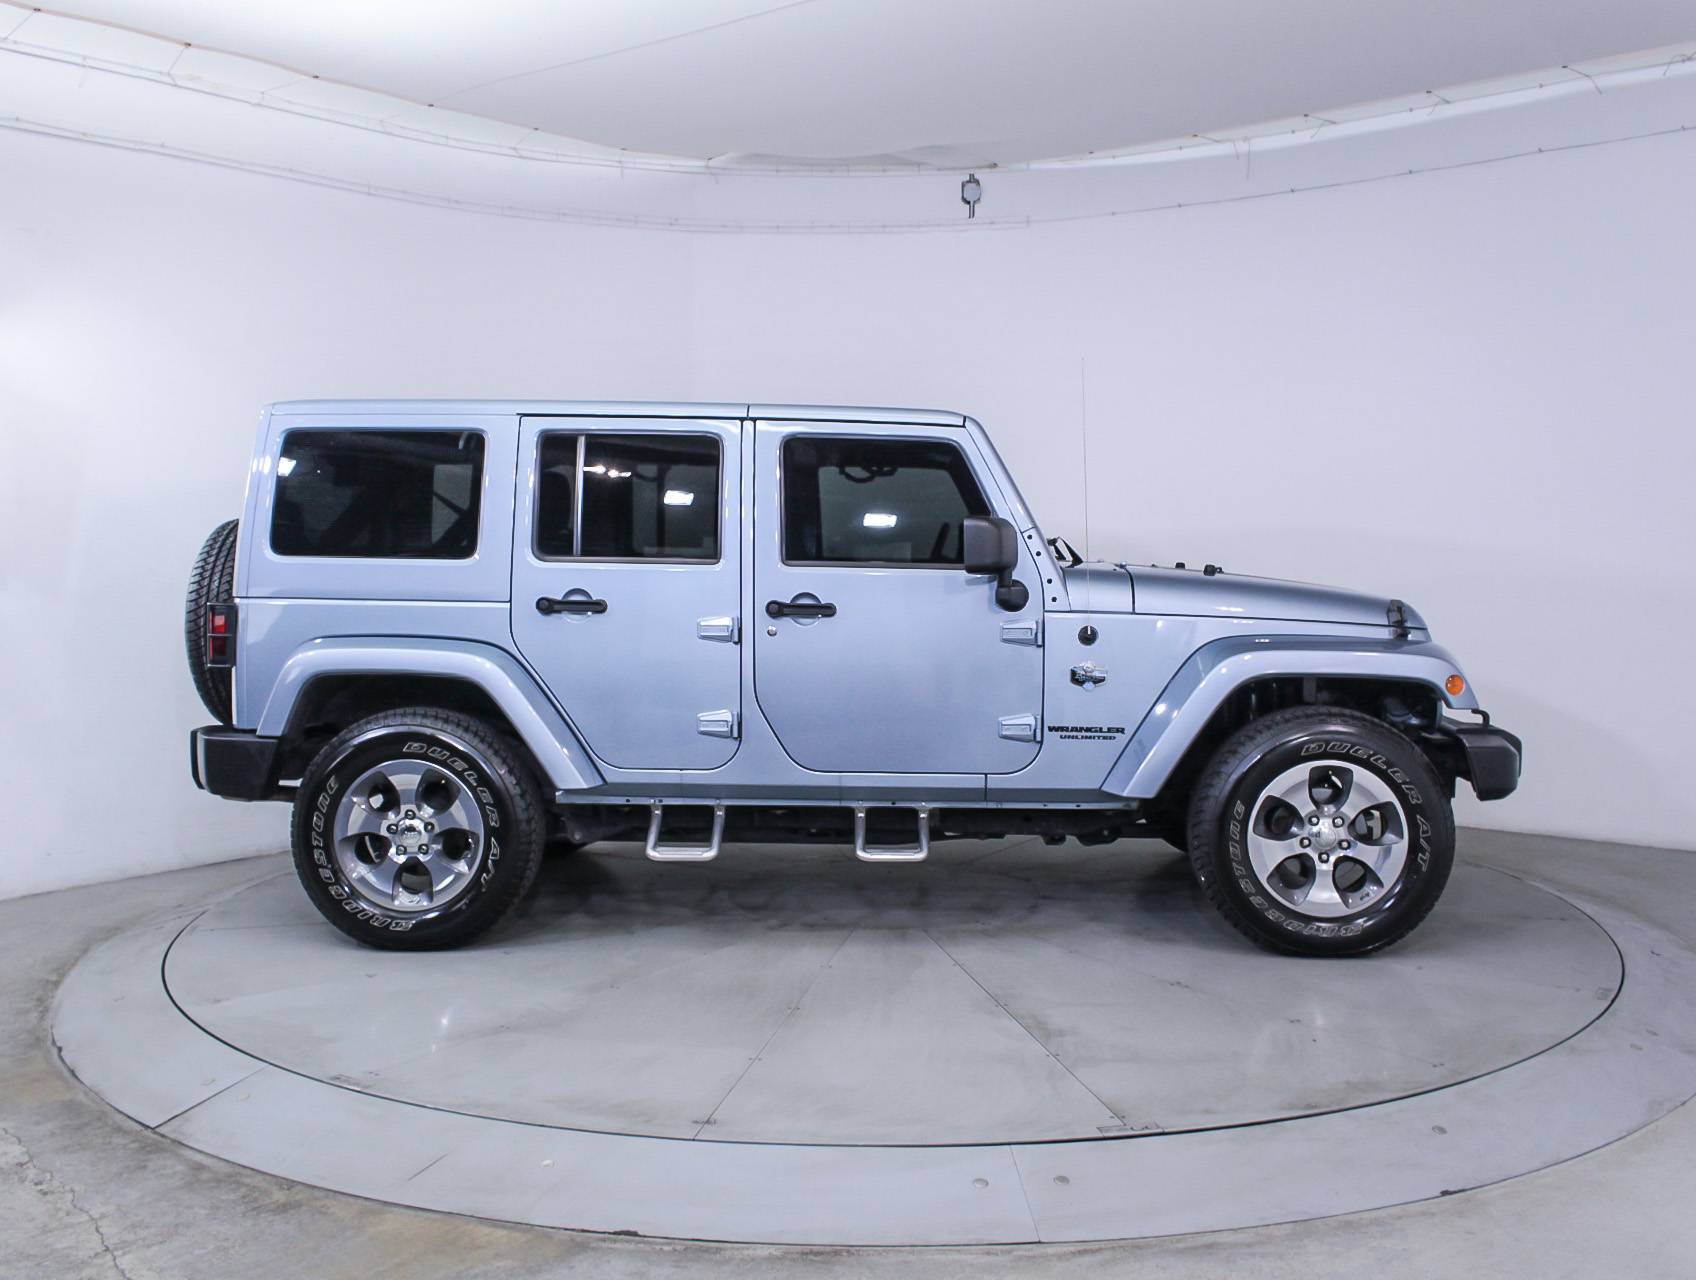 Used 2012 JEEP WRANGLER UNLIMITED Sahara Artic Edition for sale in MIAMI |  85961